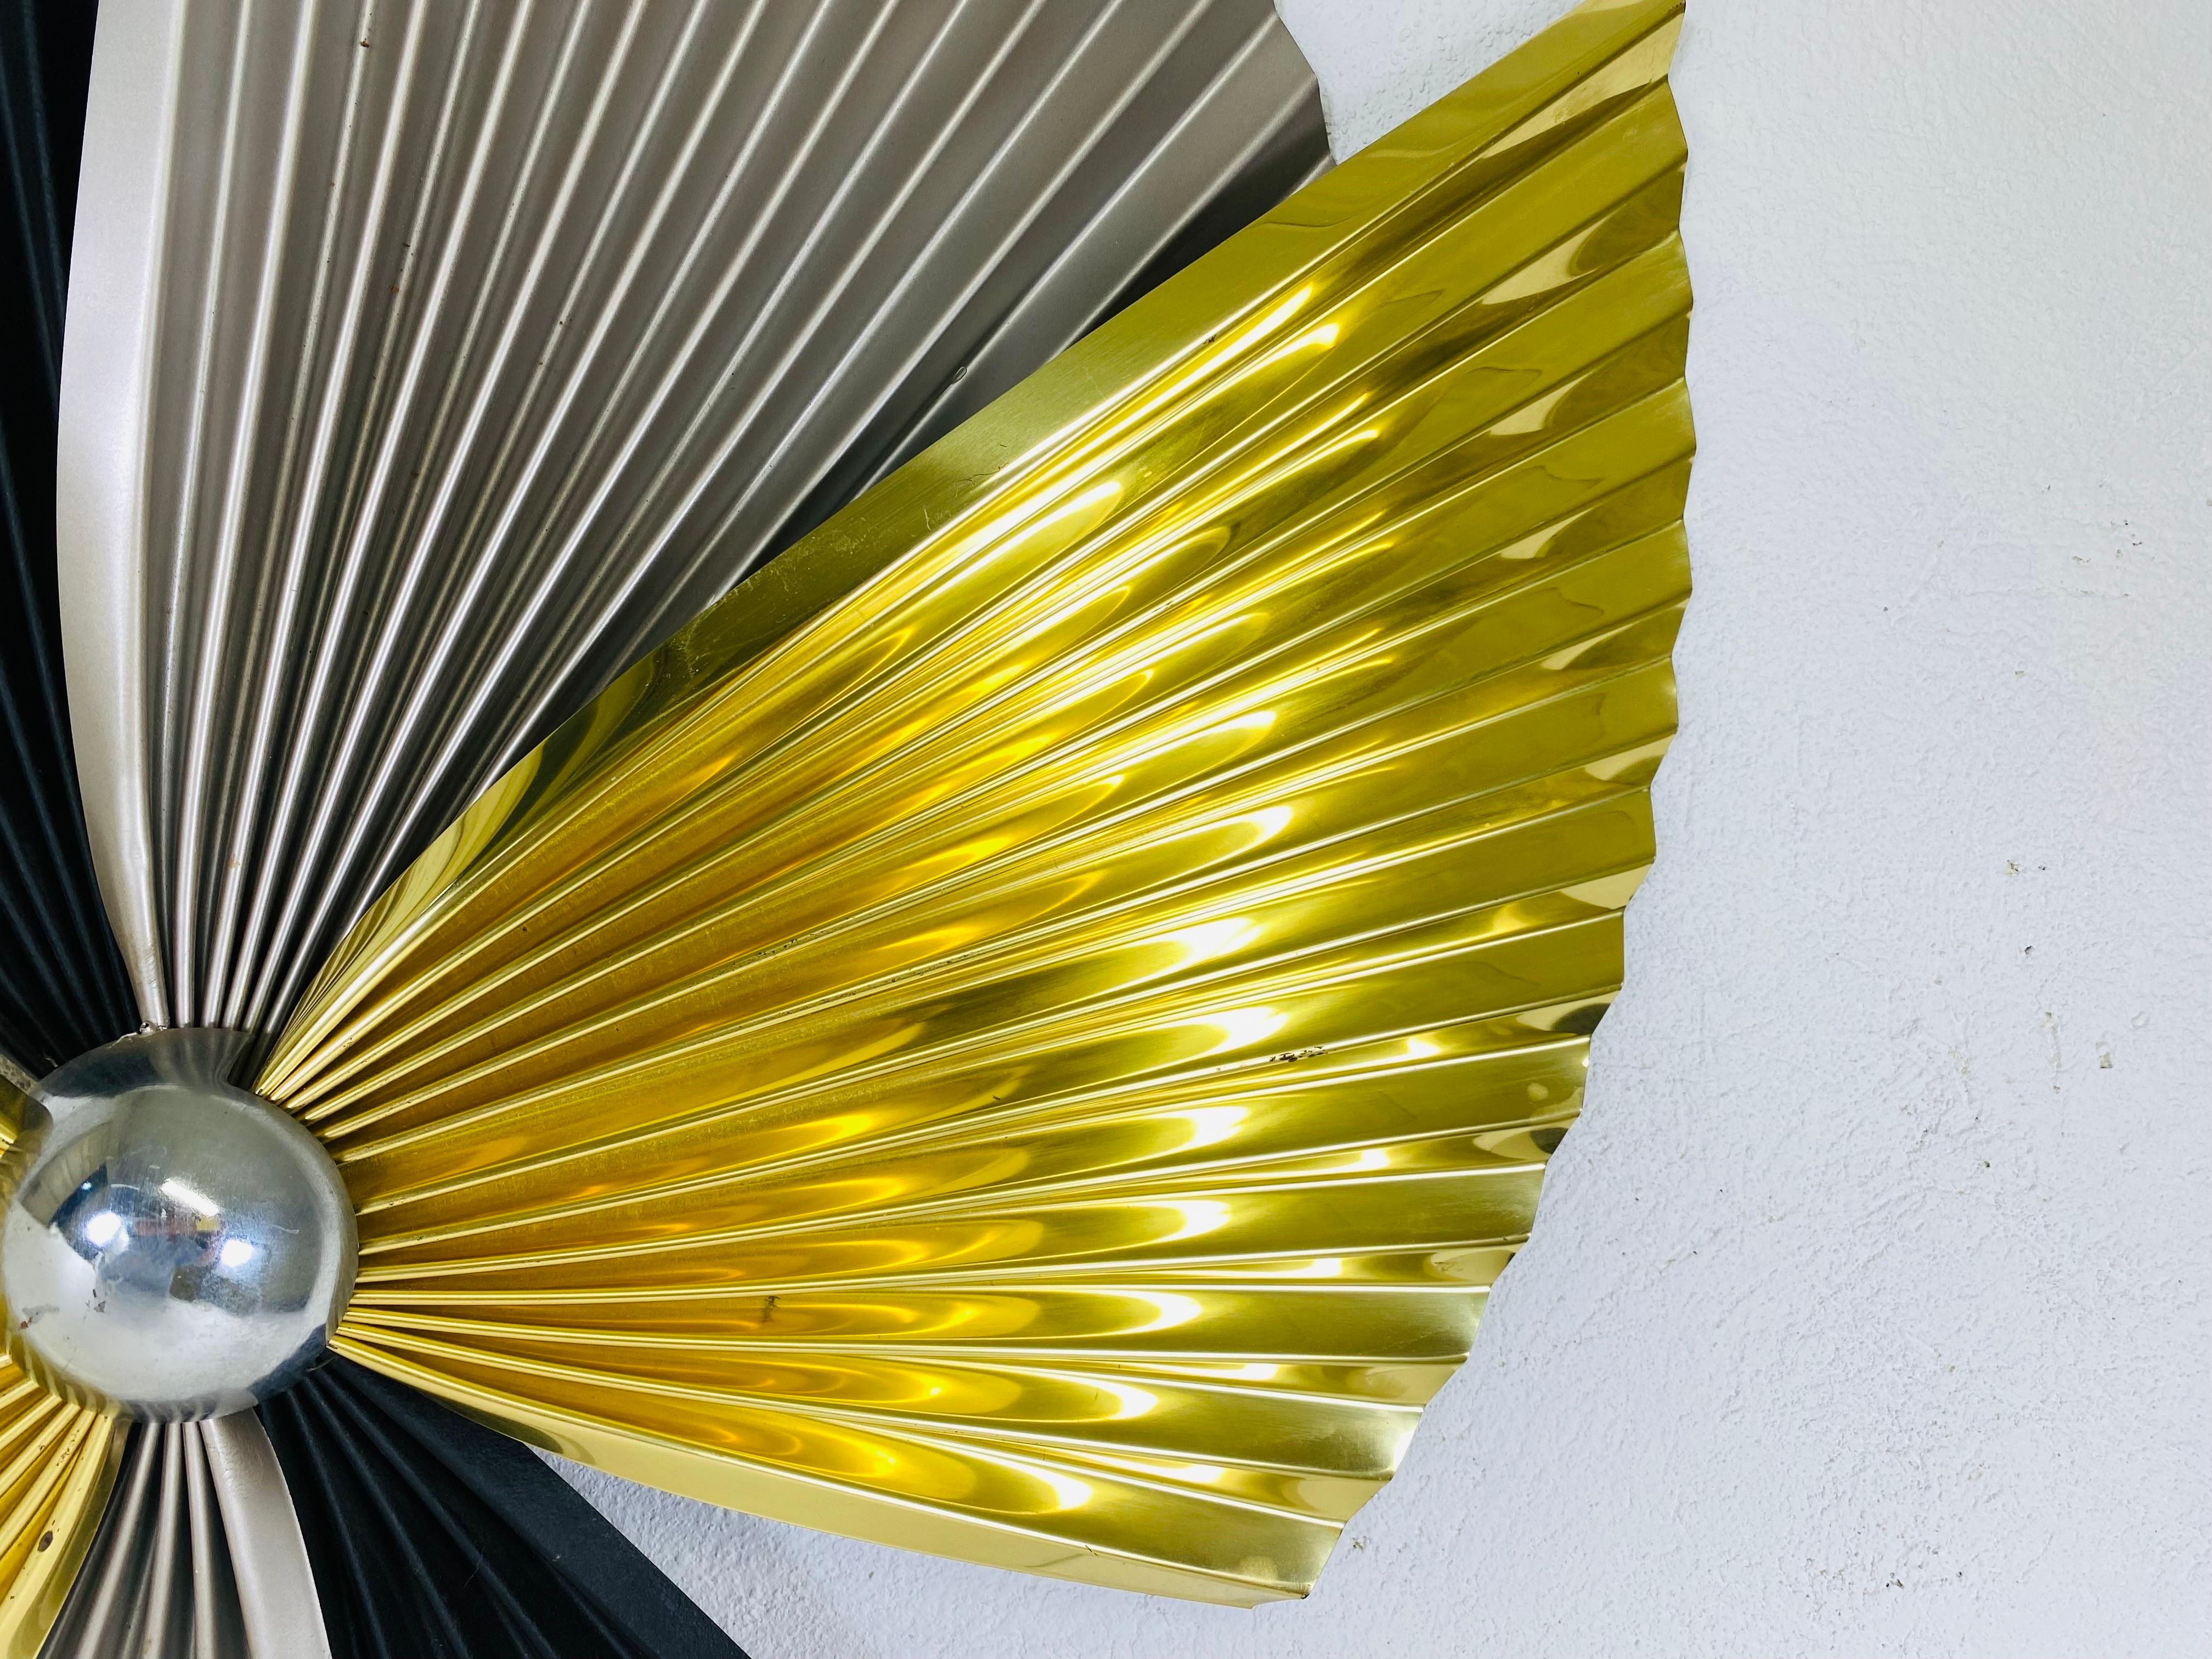 This is a mid century vintage brass and steel wall sculpture by Curtis jere. This wall sculpture has an Asian inspiration with pleated fans in brass, black and silver steel. This wall sculpture has its original documentation on the reverse.